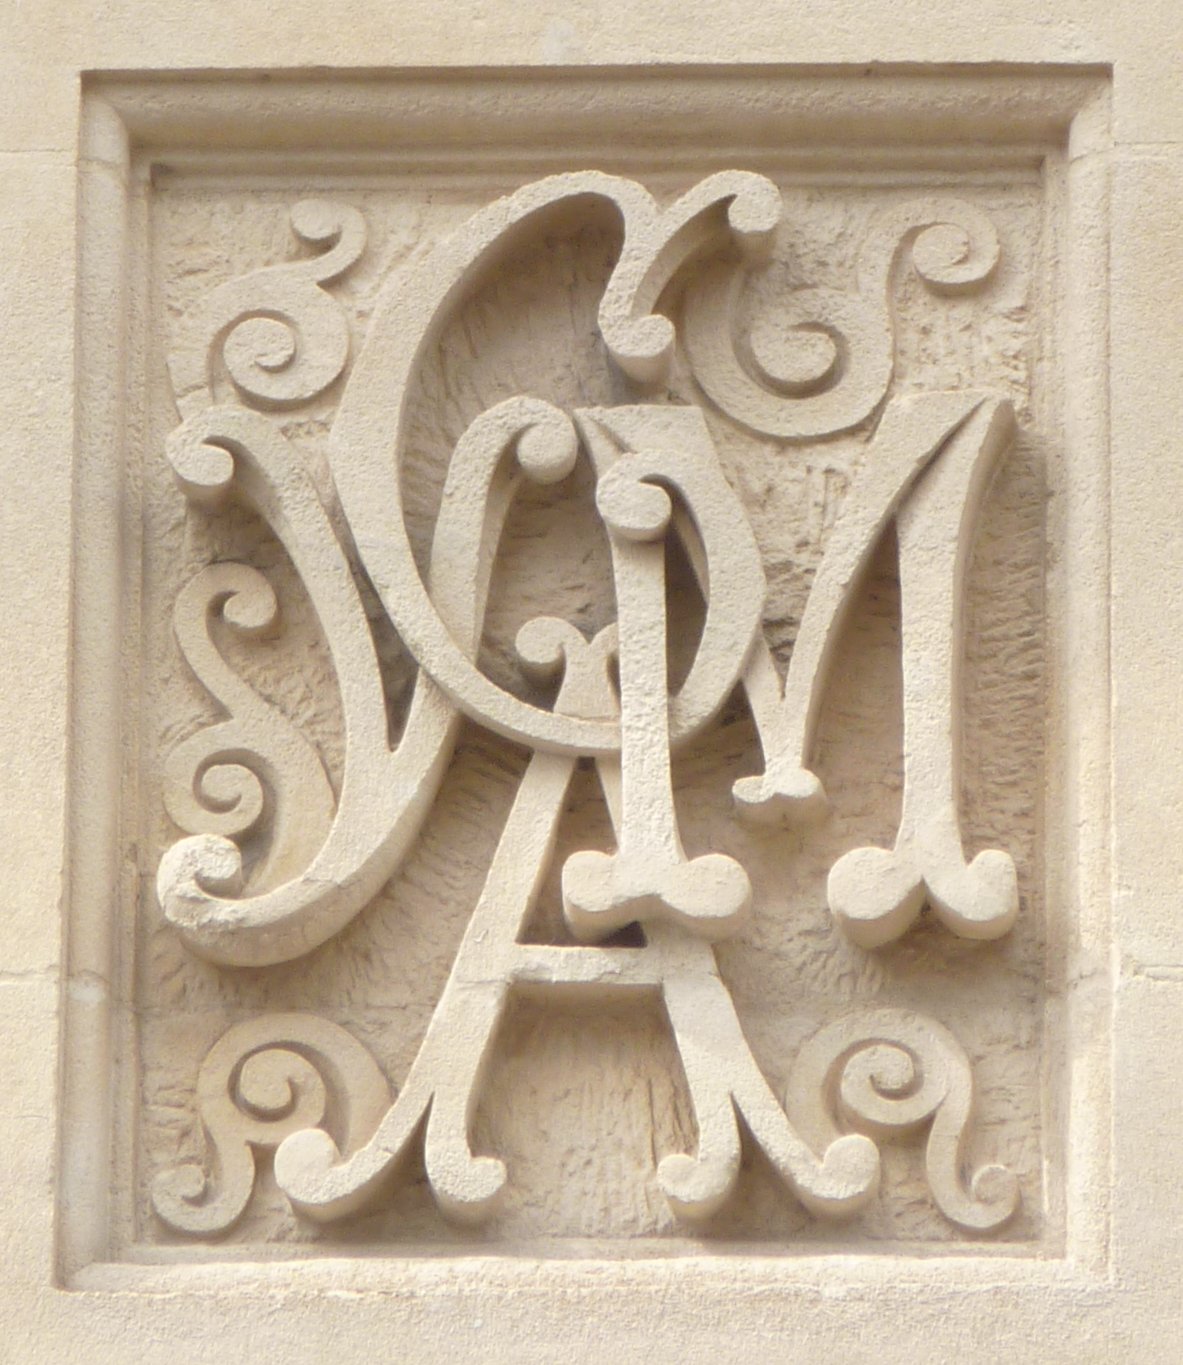 Letters carved into building